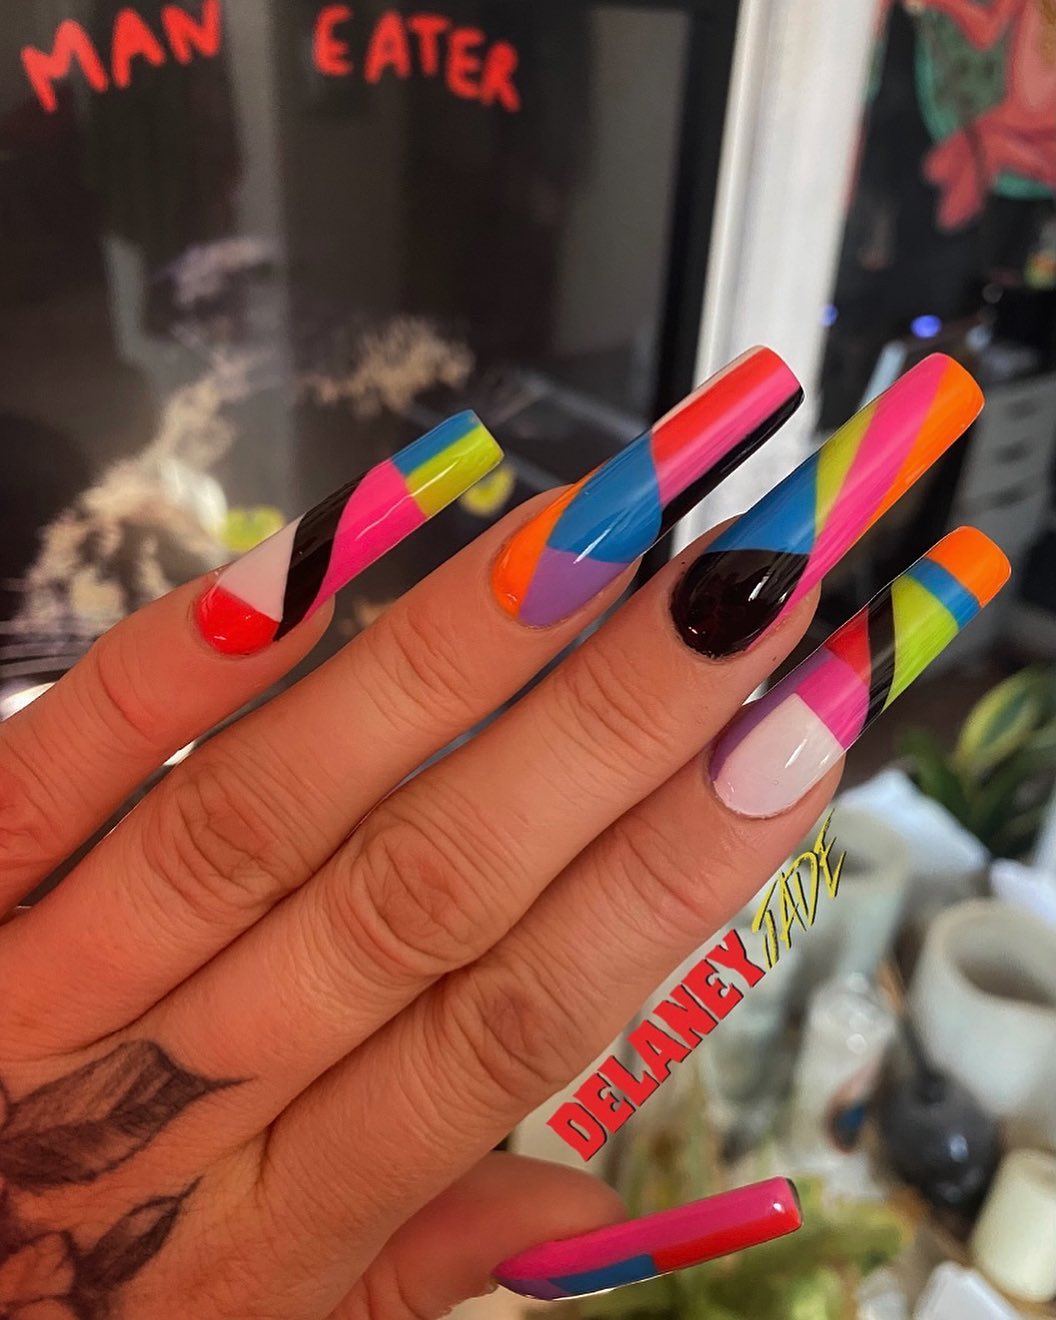 100 Trending summer nail colors and designs for 2021.